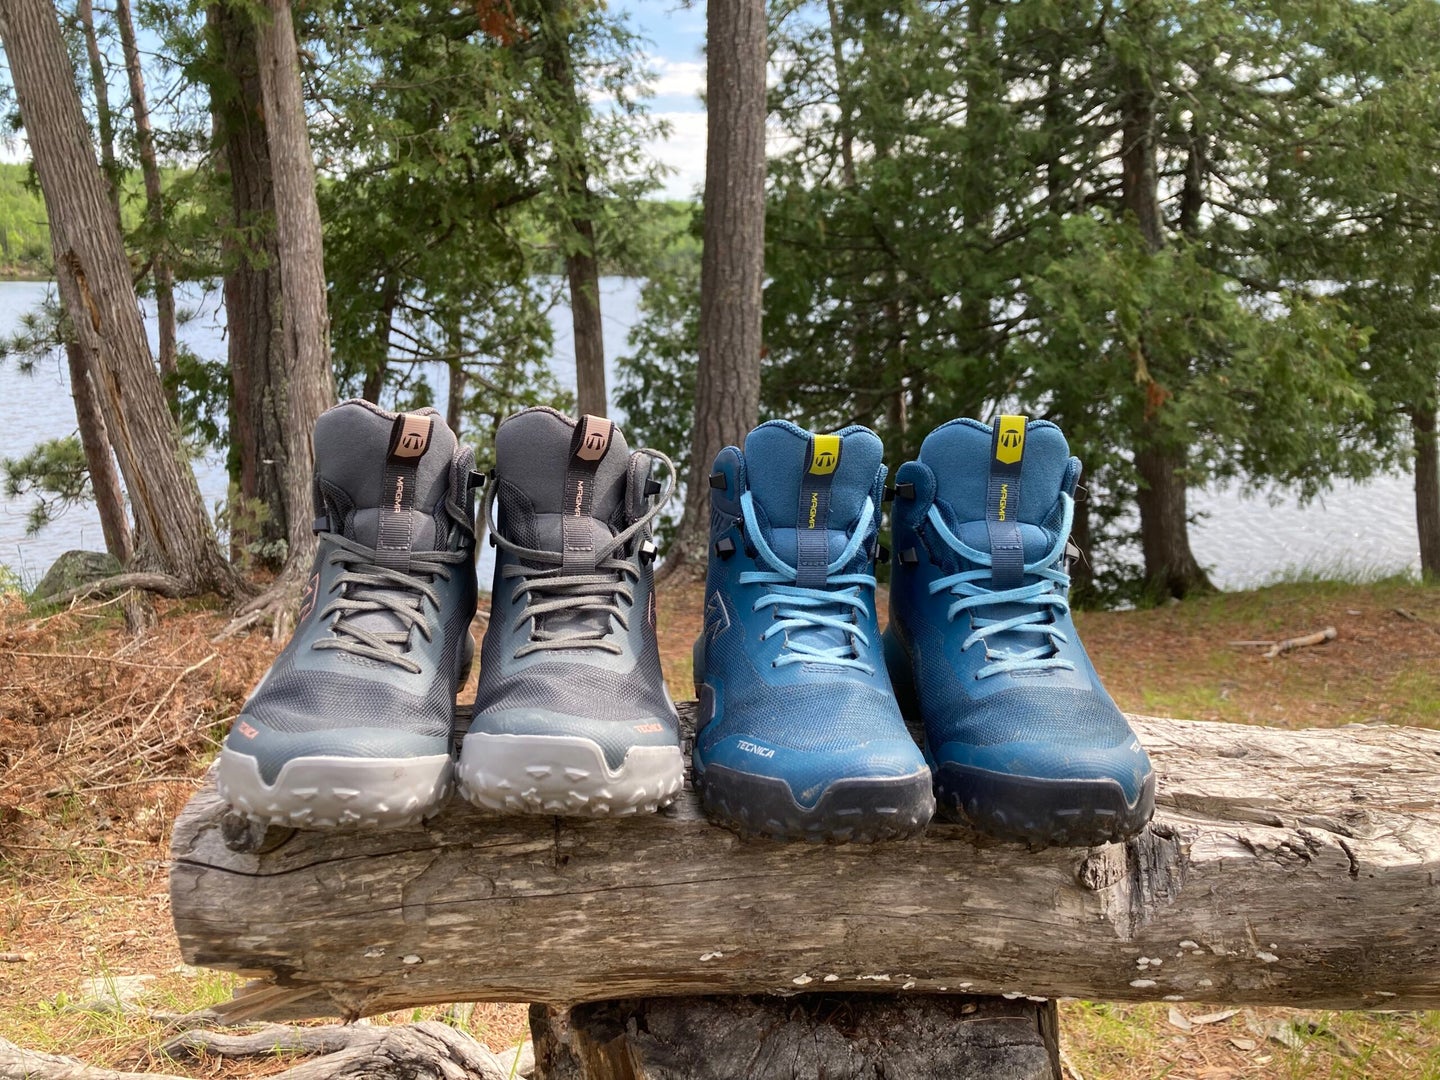 What Makes for a Great Hiking Boot?